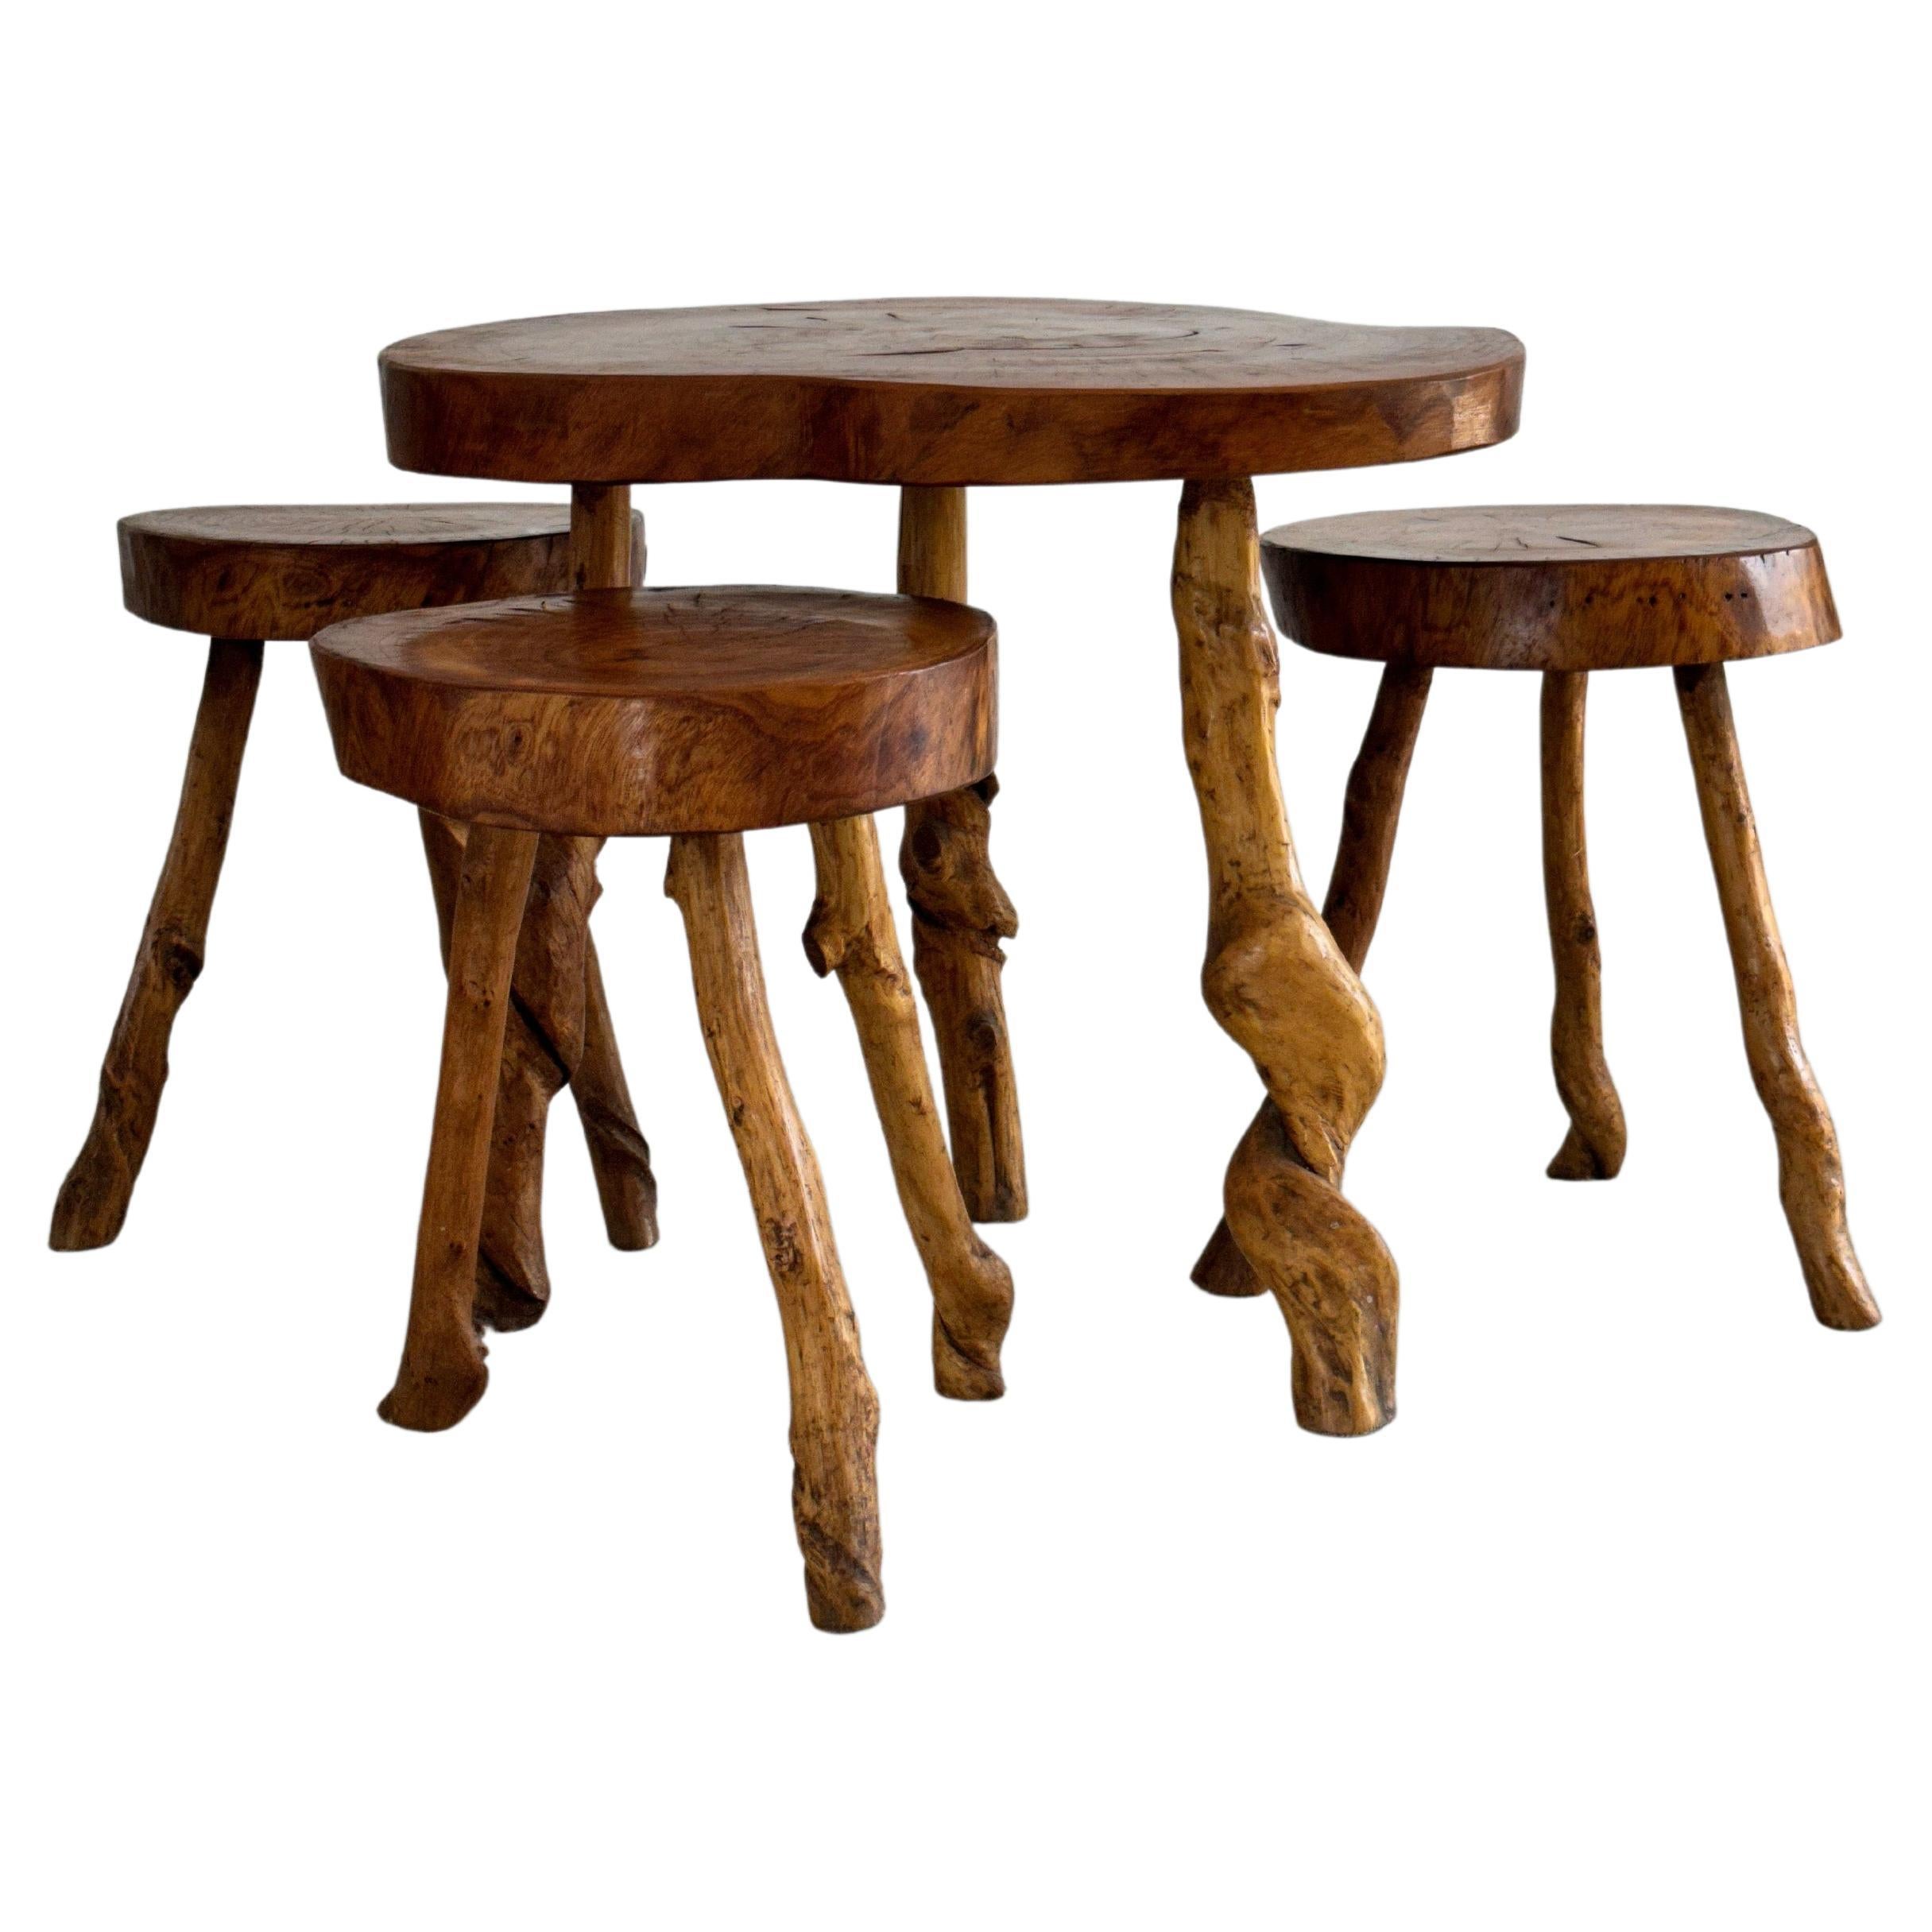 Brutalist Set of 3 Low Stools and 1 Coffee Table, Solid Wood, France, 1960s For Sale